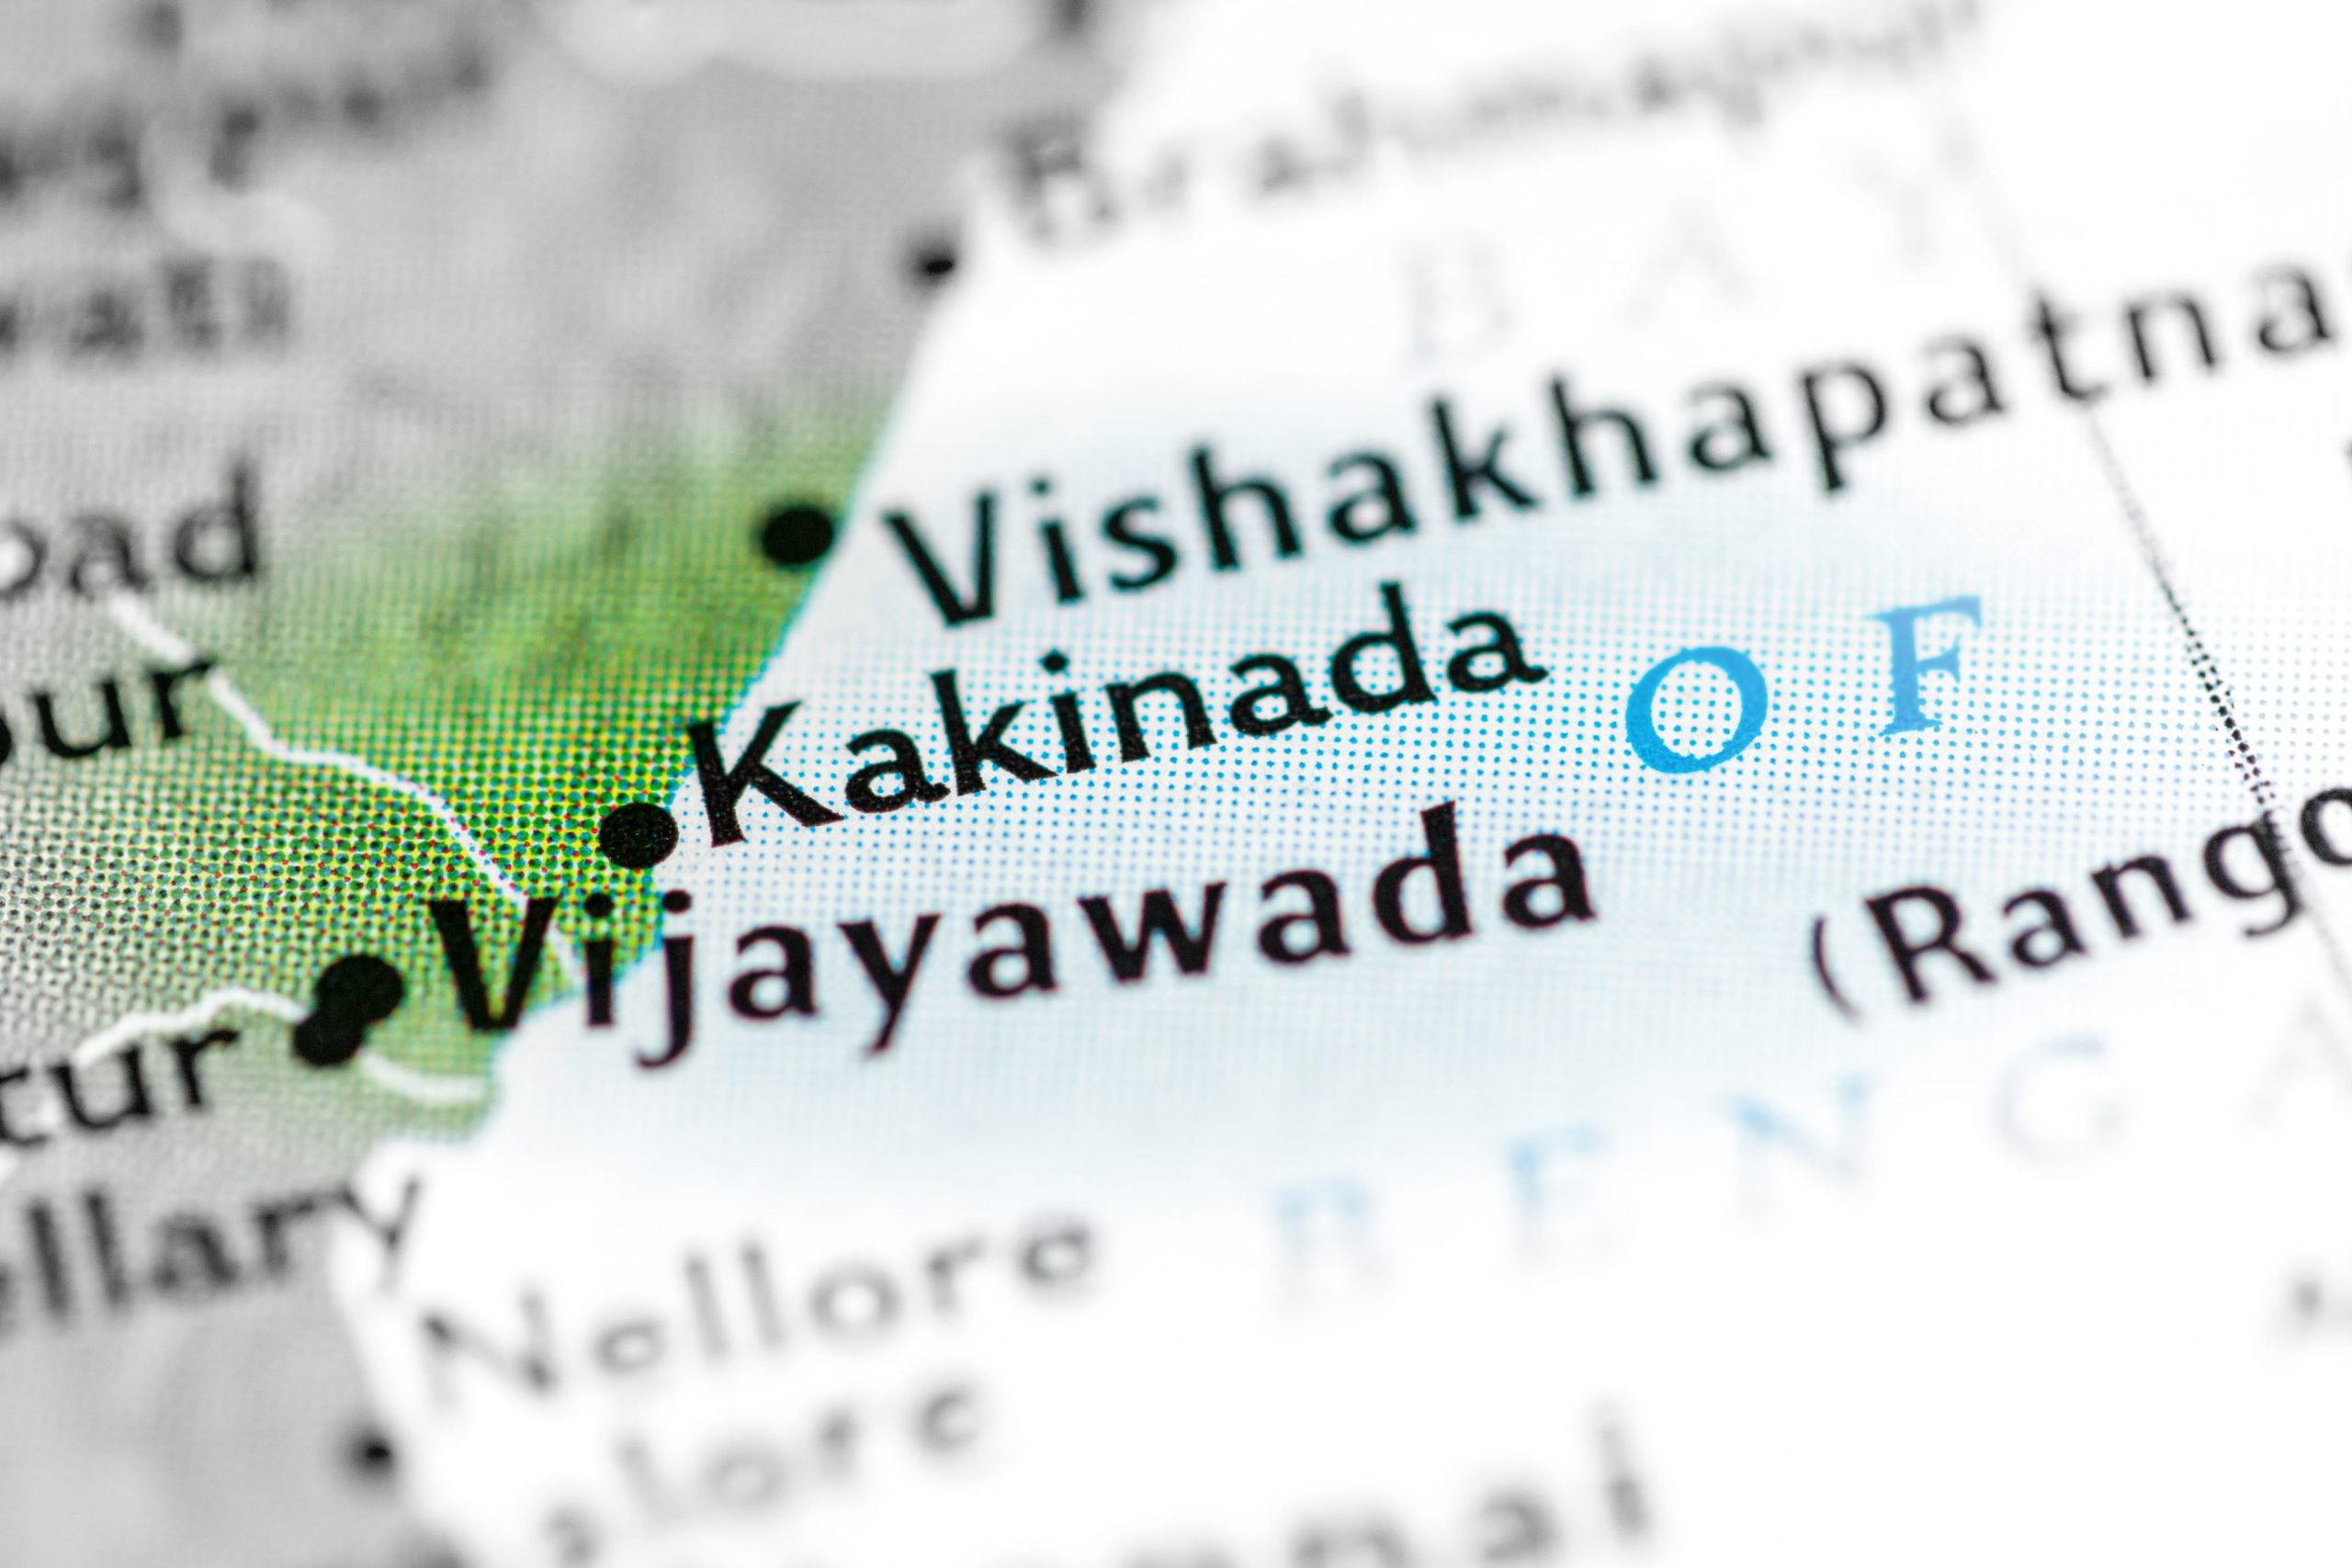 Location of Kakinada in the southern map